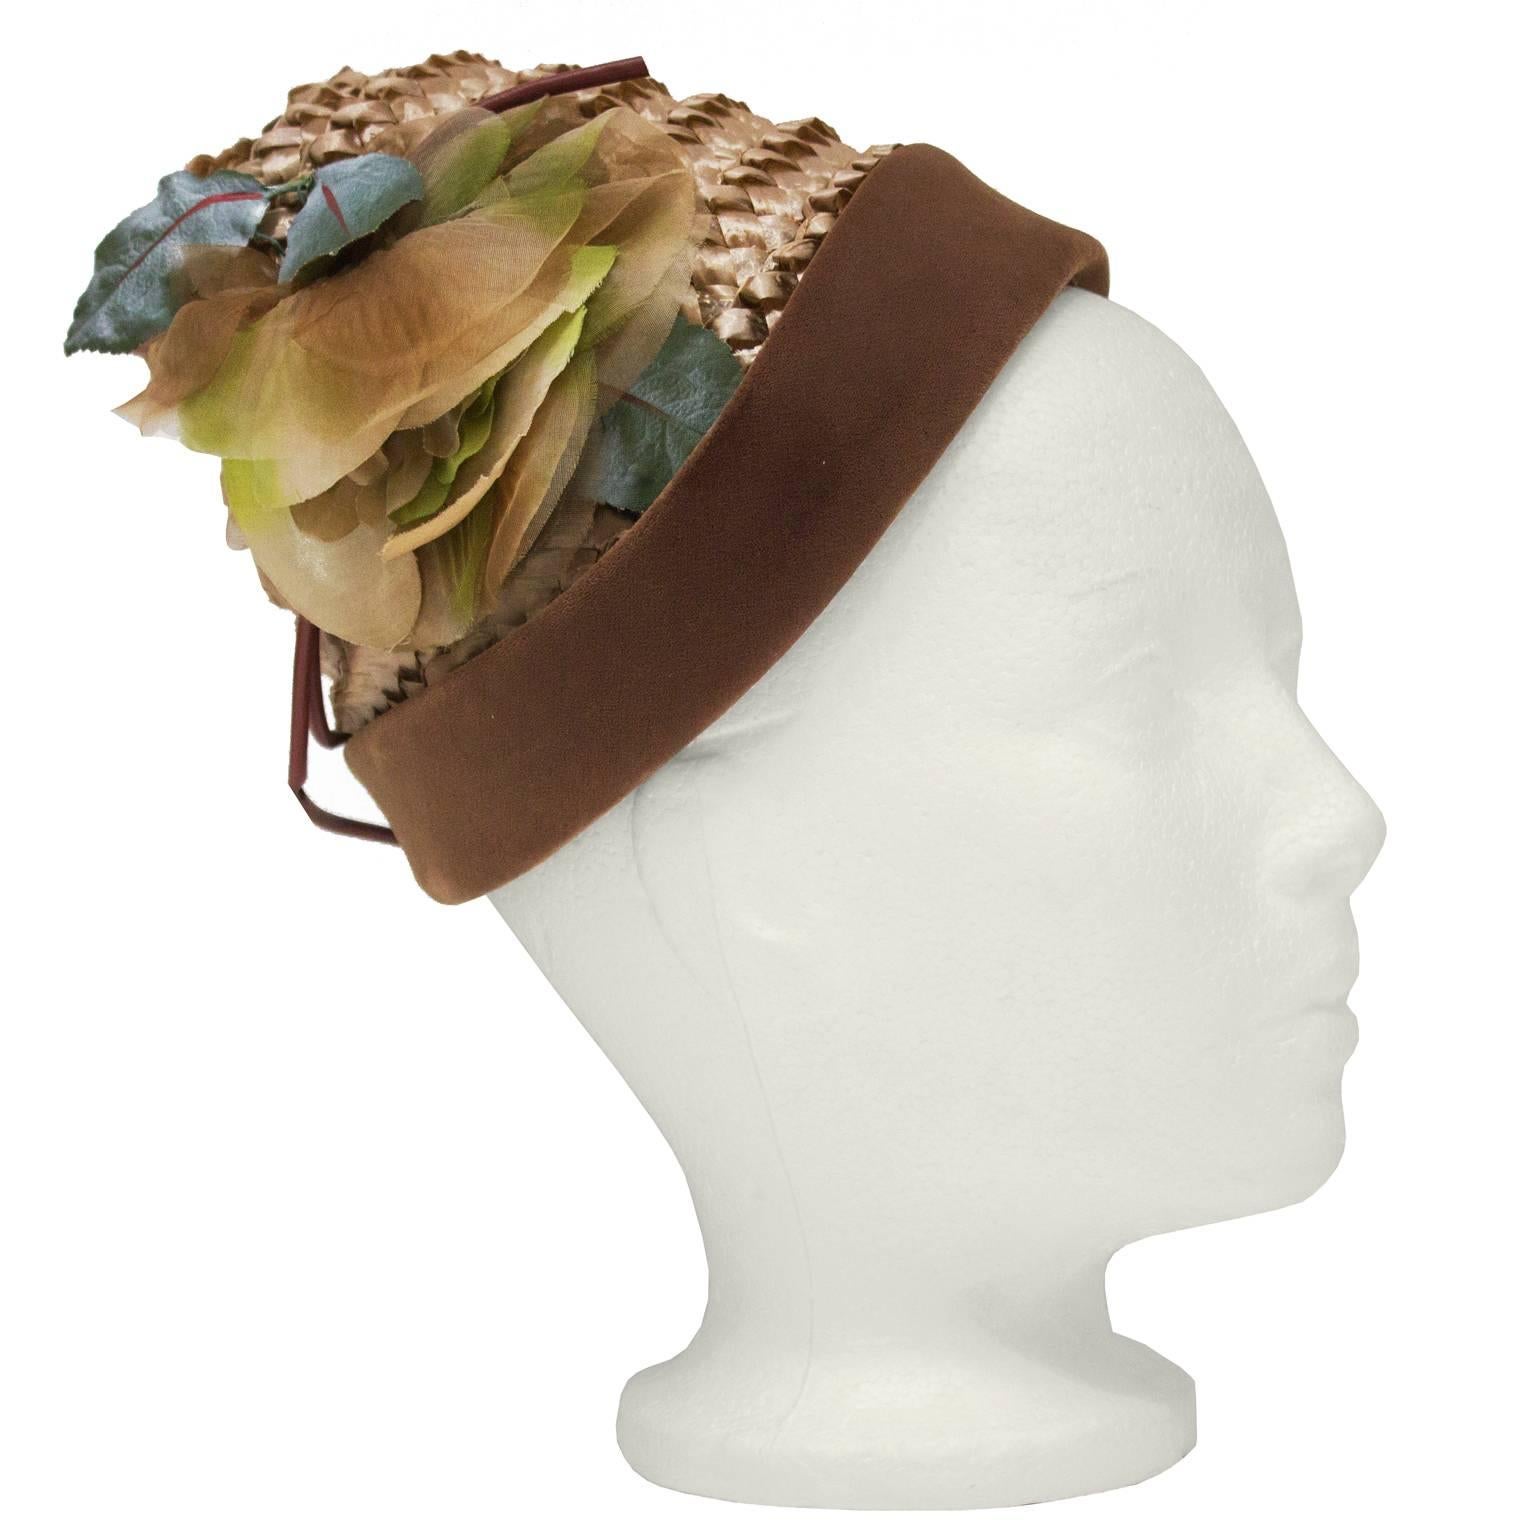 Henry Morgan whimsical beehive style hat straw from the 1950's. The woven iridescent hat is decorated with a faux flower on the side, and finished with a band of matching brown velvet. In excellent condition. Small fit. Meant to perch at a 